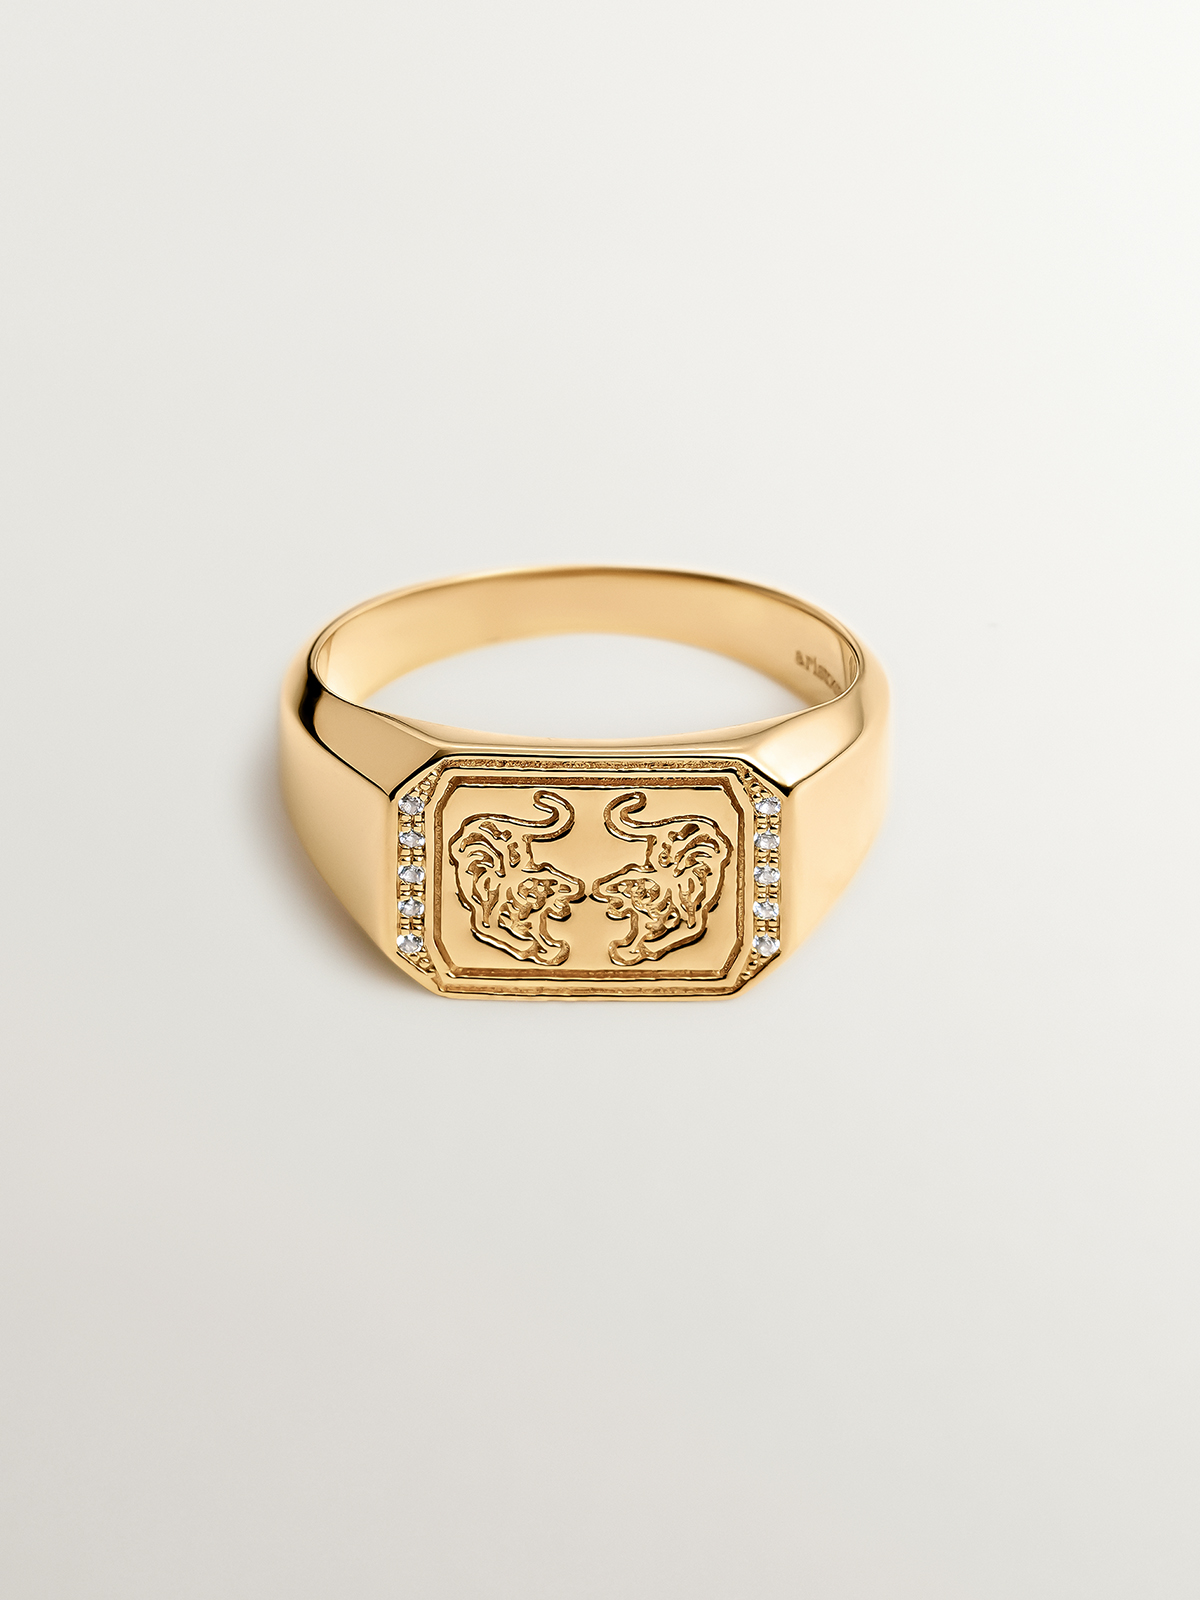 925 Silver signet ring bathed in 18K yellow gold with tigers and topazes.